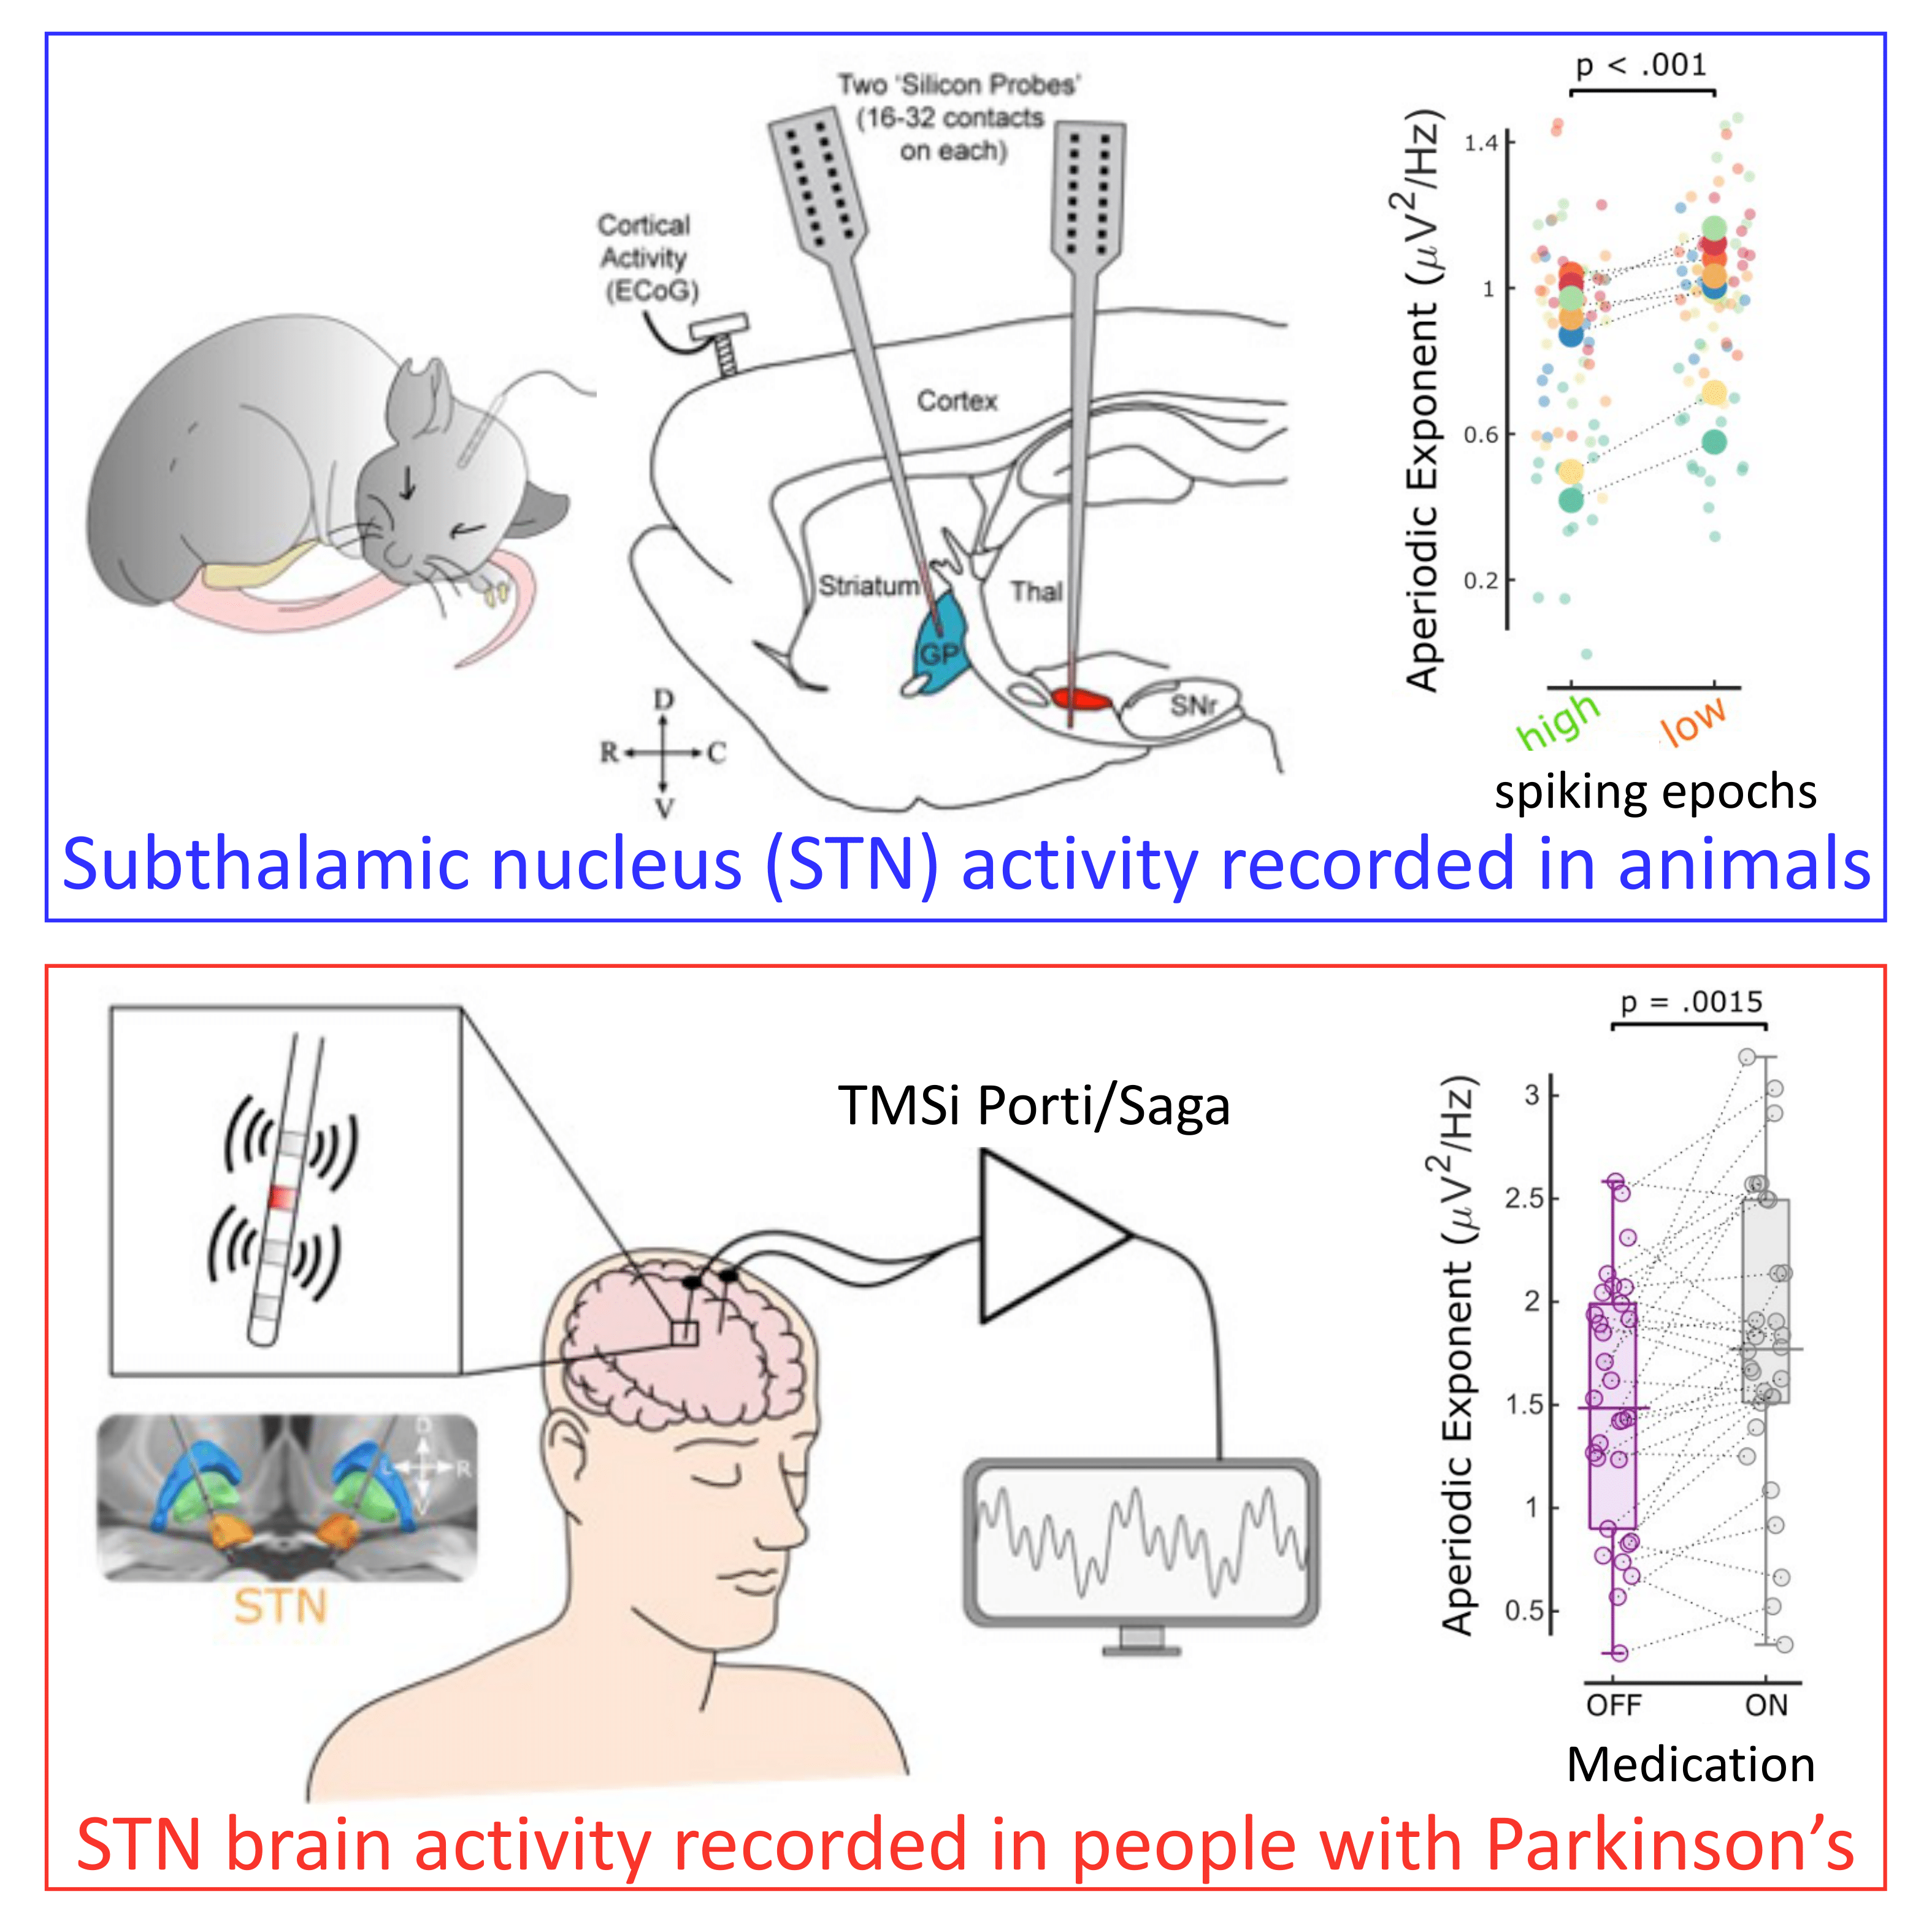 Top panel: left, picture of rodent with implanted electrode, centre, drawing of brain anatomy, right, figure with two columns of coloured dots; bottom panel, left, drawing of electrodes in a human brain, signals goings to a screen, right, figure with two columns with coloured dots